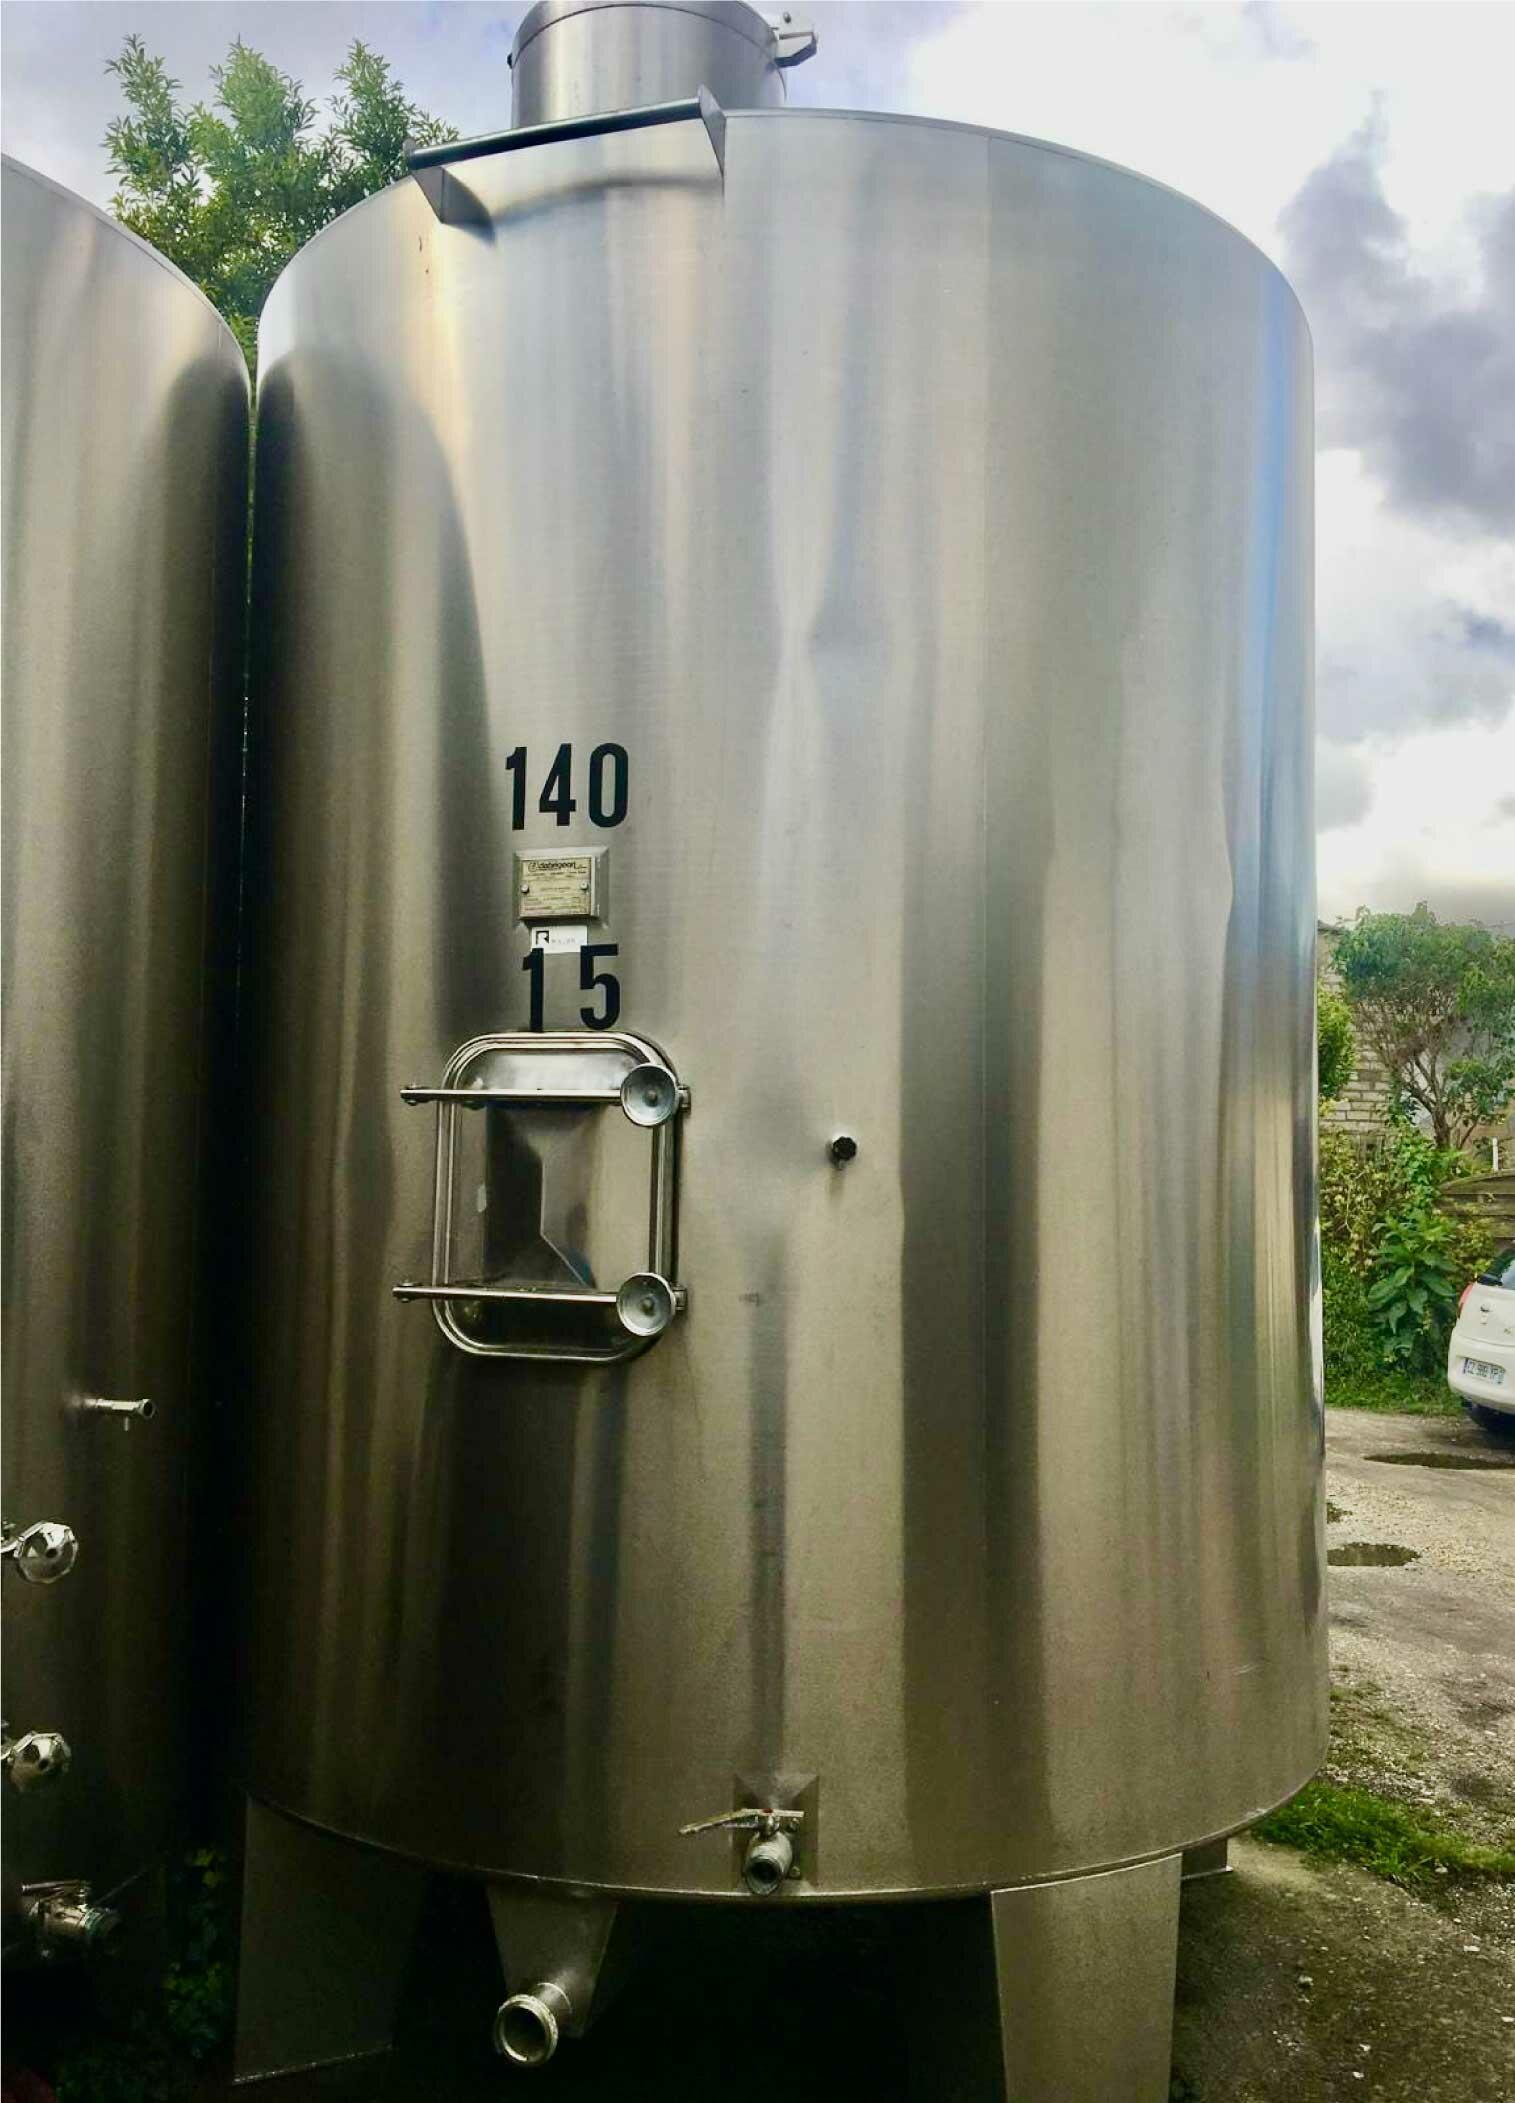 Closed 304 stainless steel tank - Vertical cylindrical on legs